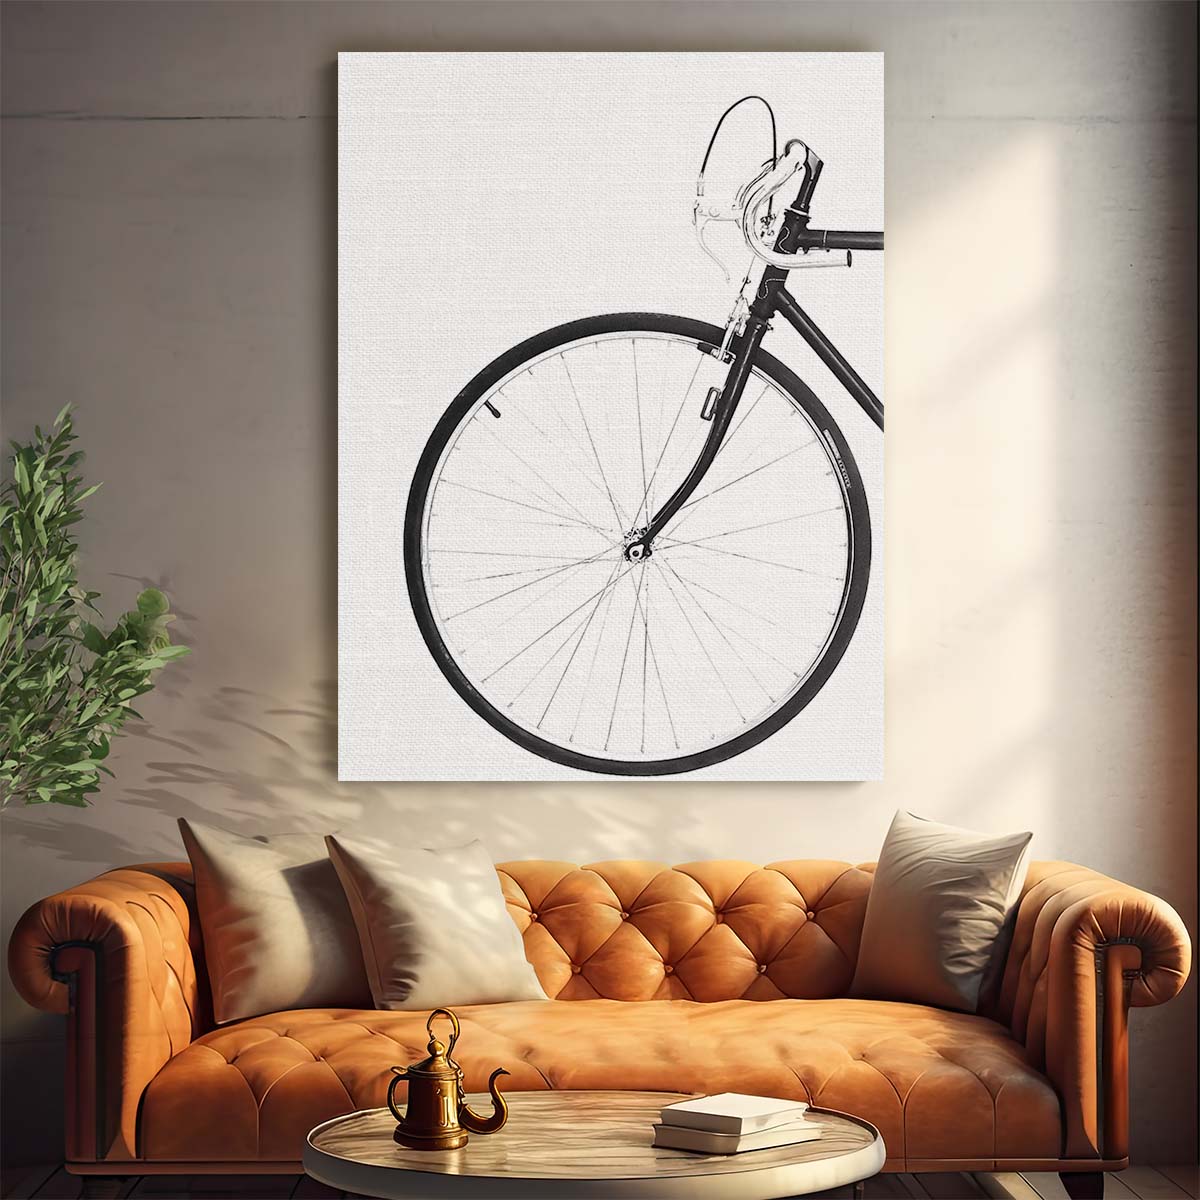 Monochrome Bicycle Still Life Photography by Kathrin Pienaar by Luxuriance Designs, made in USA